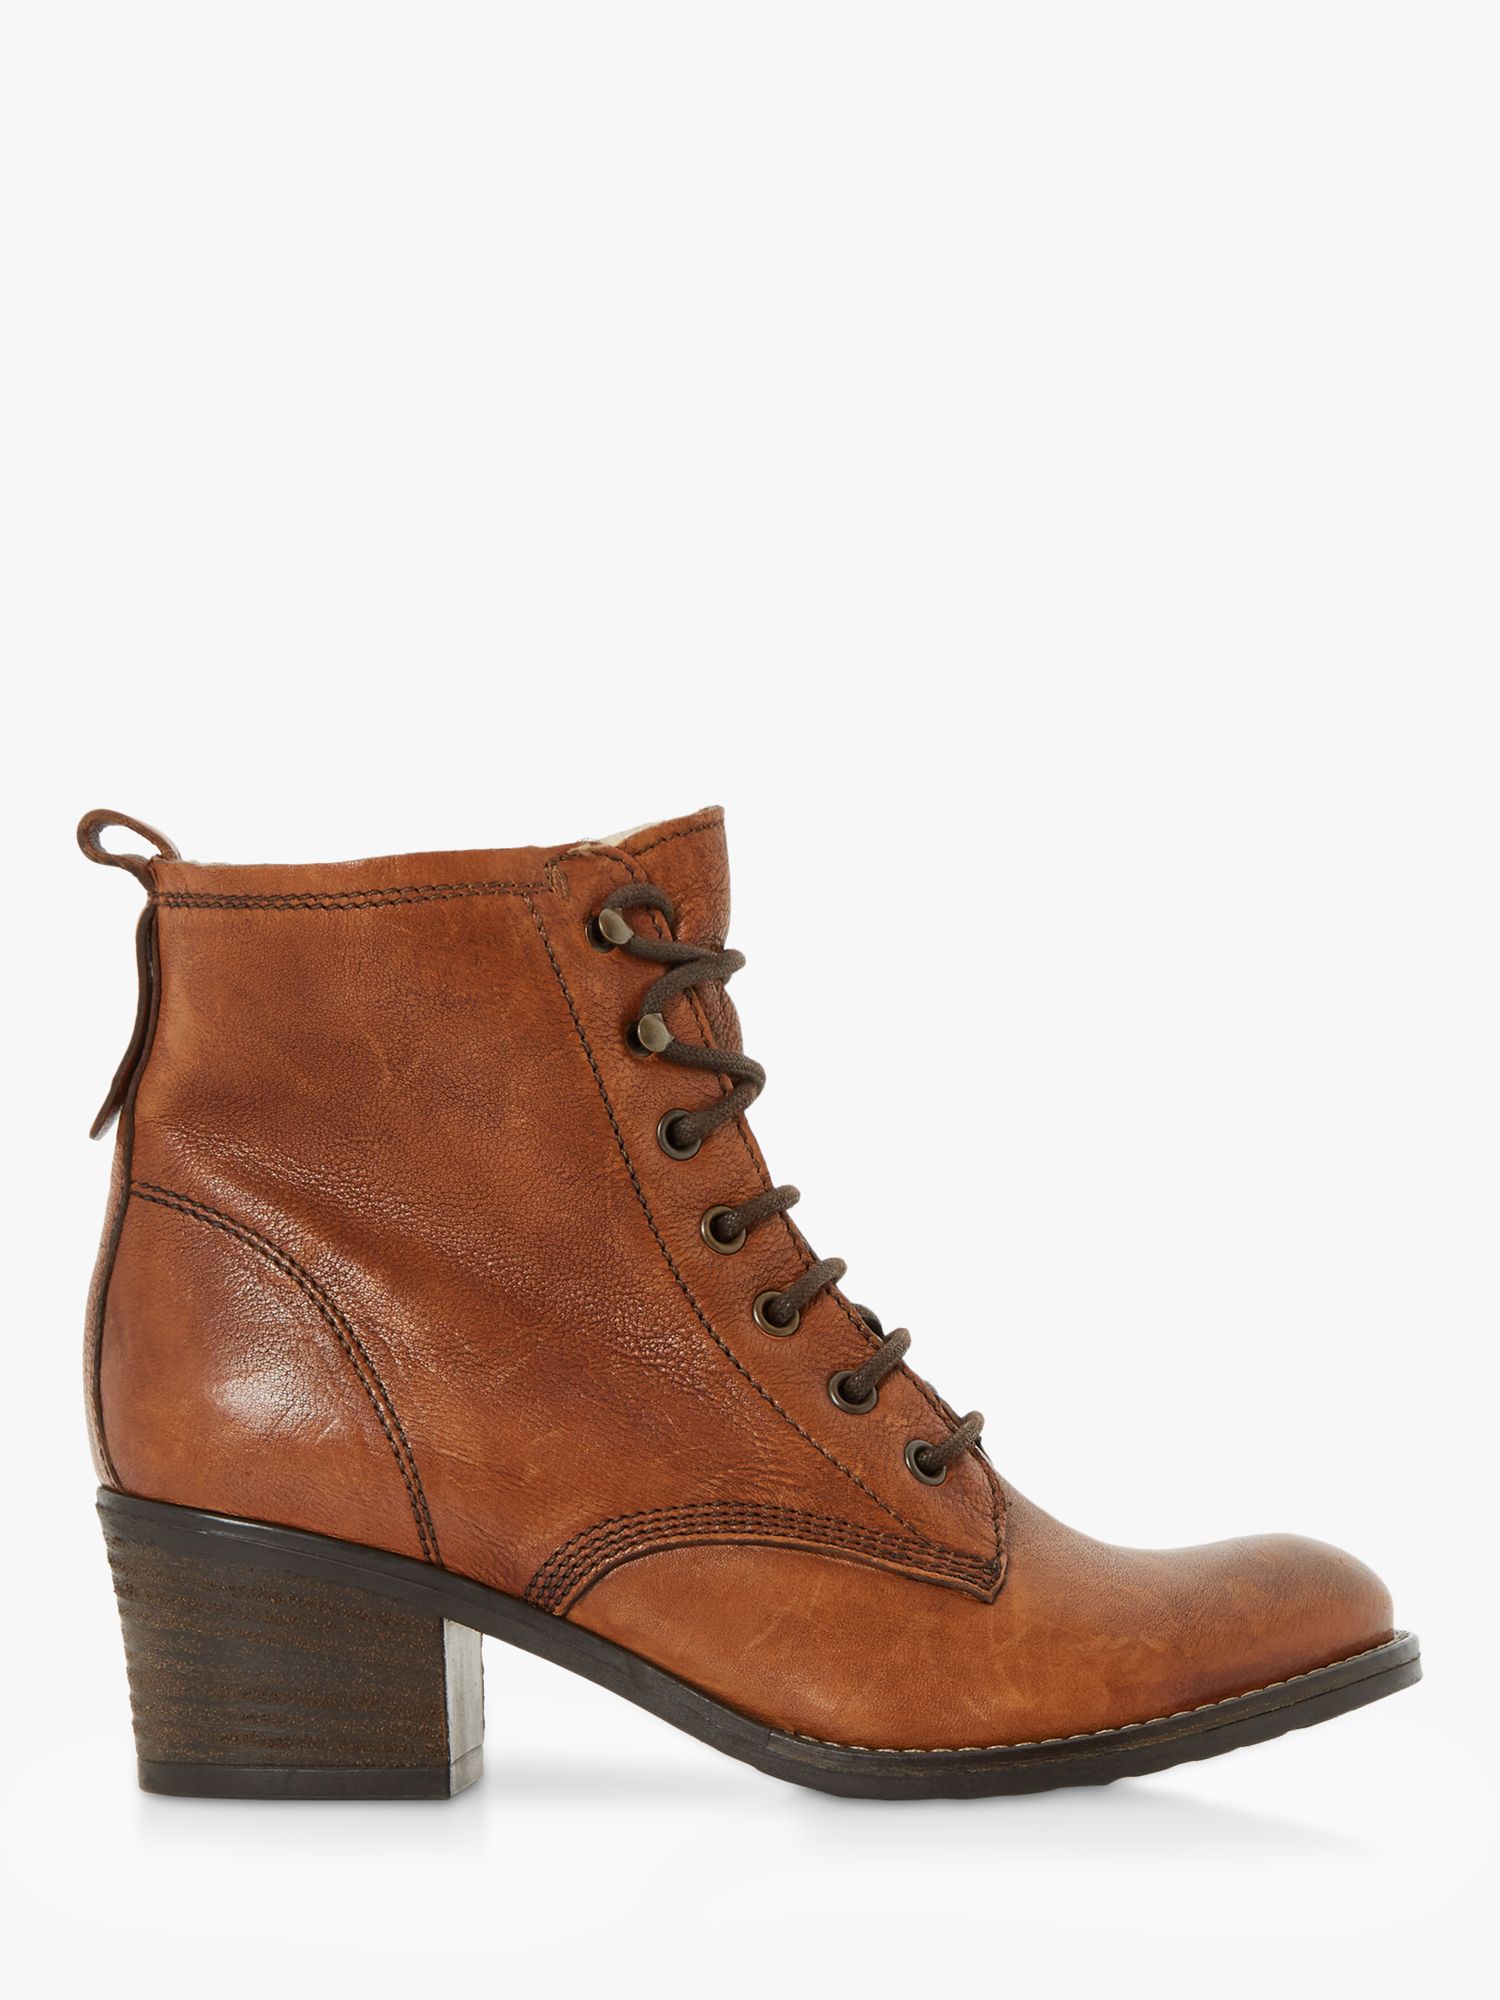 Dune Patsie D Lace Up Ankle Boots, Tan at John Lewis u0026 Partners